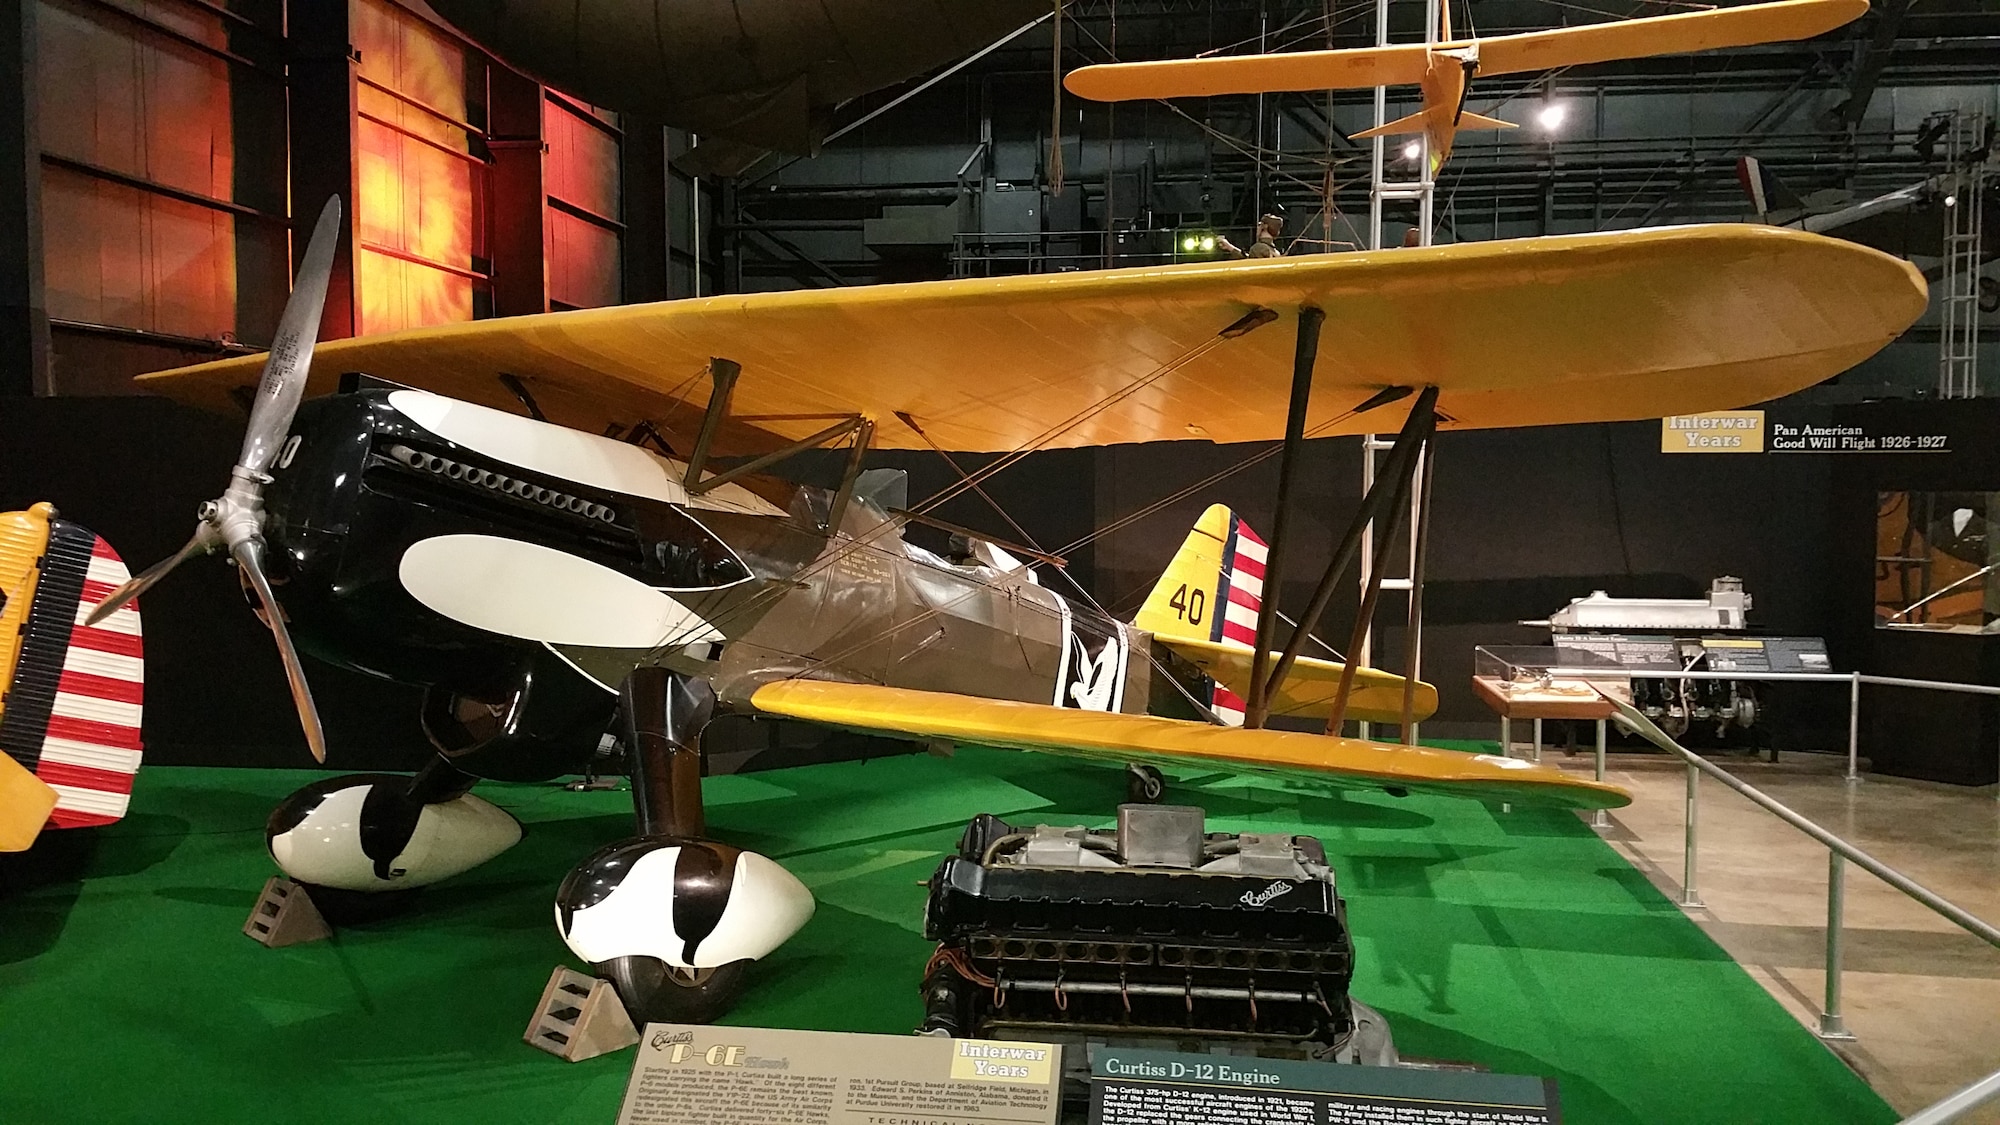 DAYTON, Ohio -- Curtiss P-6E Hawk on display in the Early Years Gallery at the National Museum of the United States Air Force. (U.S. Air Force photo)